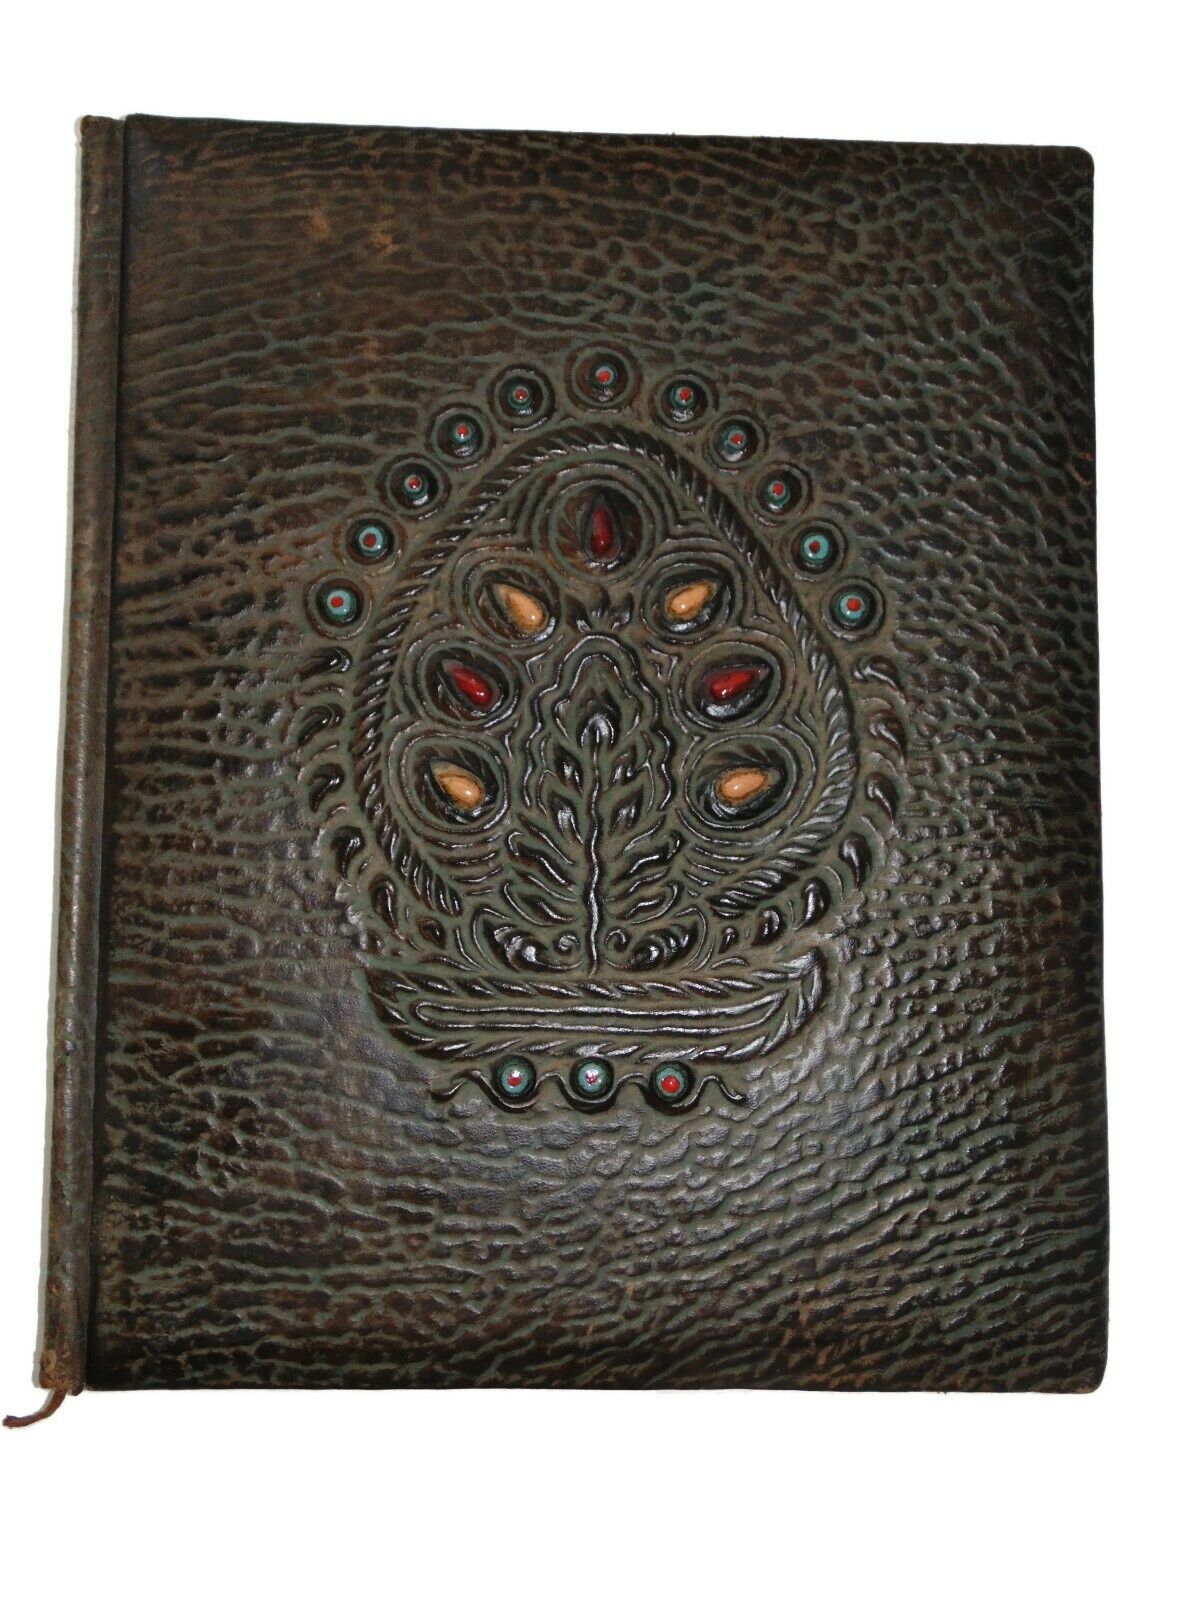 HUGE OLD Vintage Artisan Brown Leather Bound Book NoteBook Hard Covers Pagan